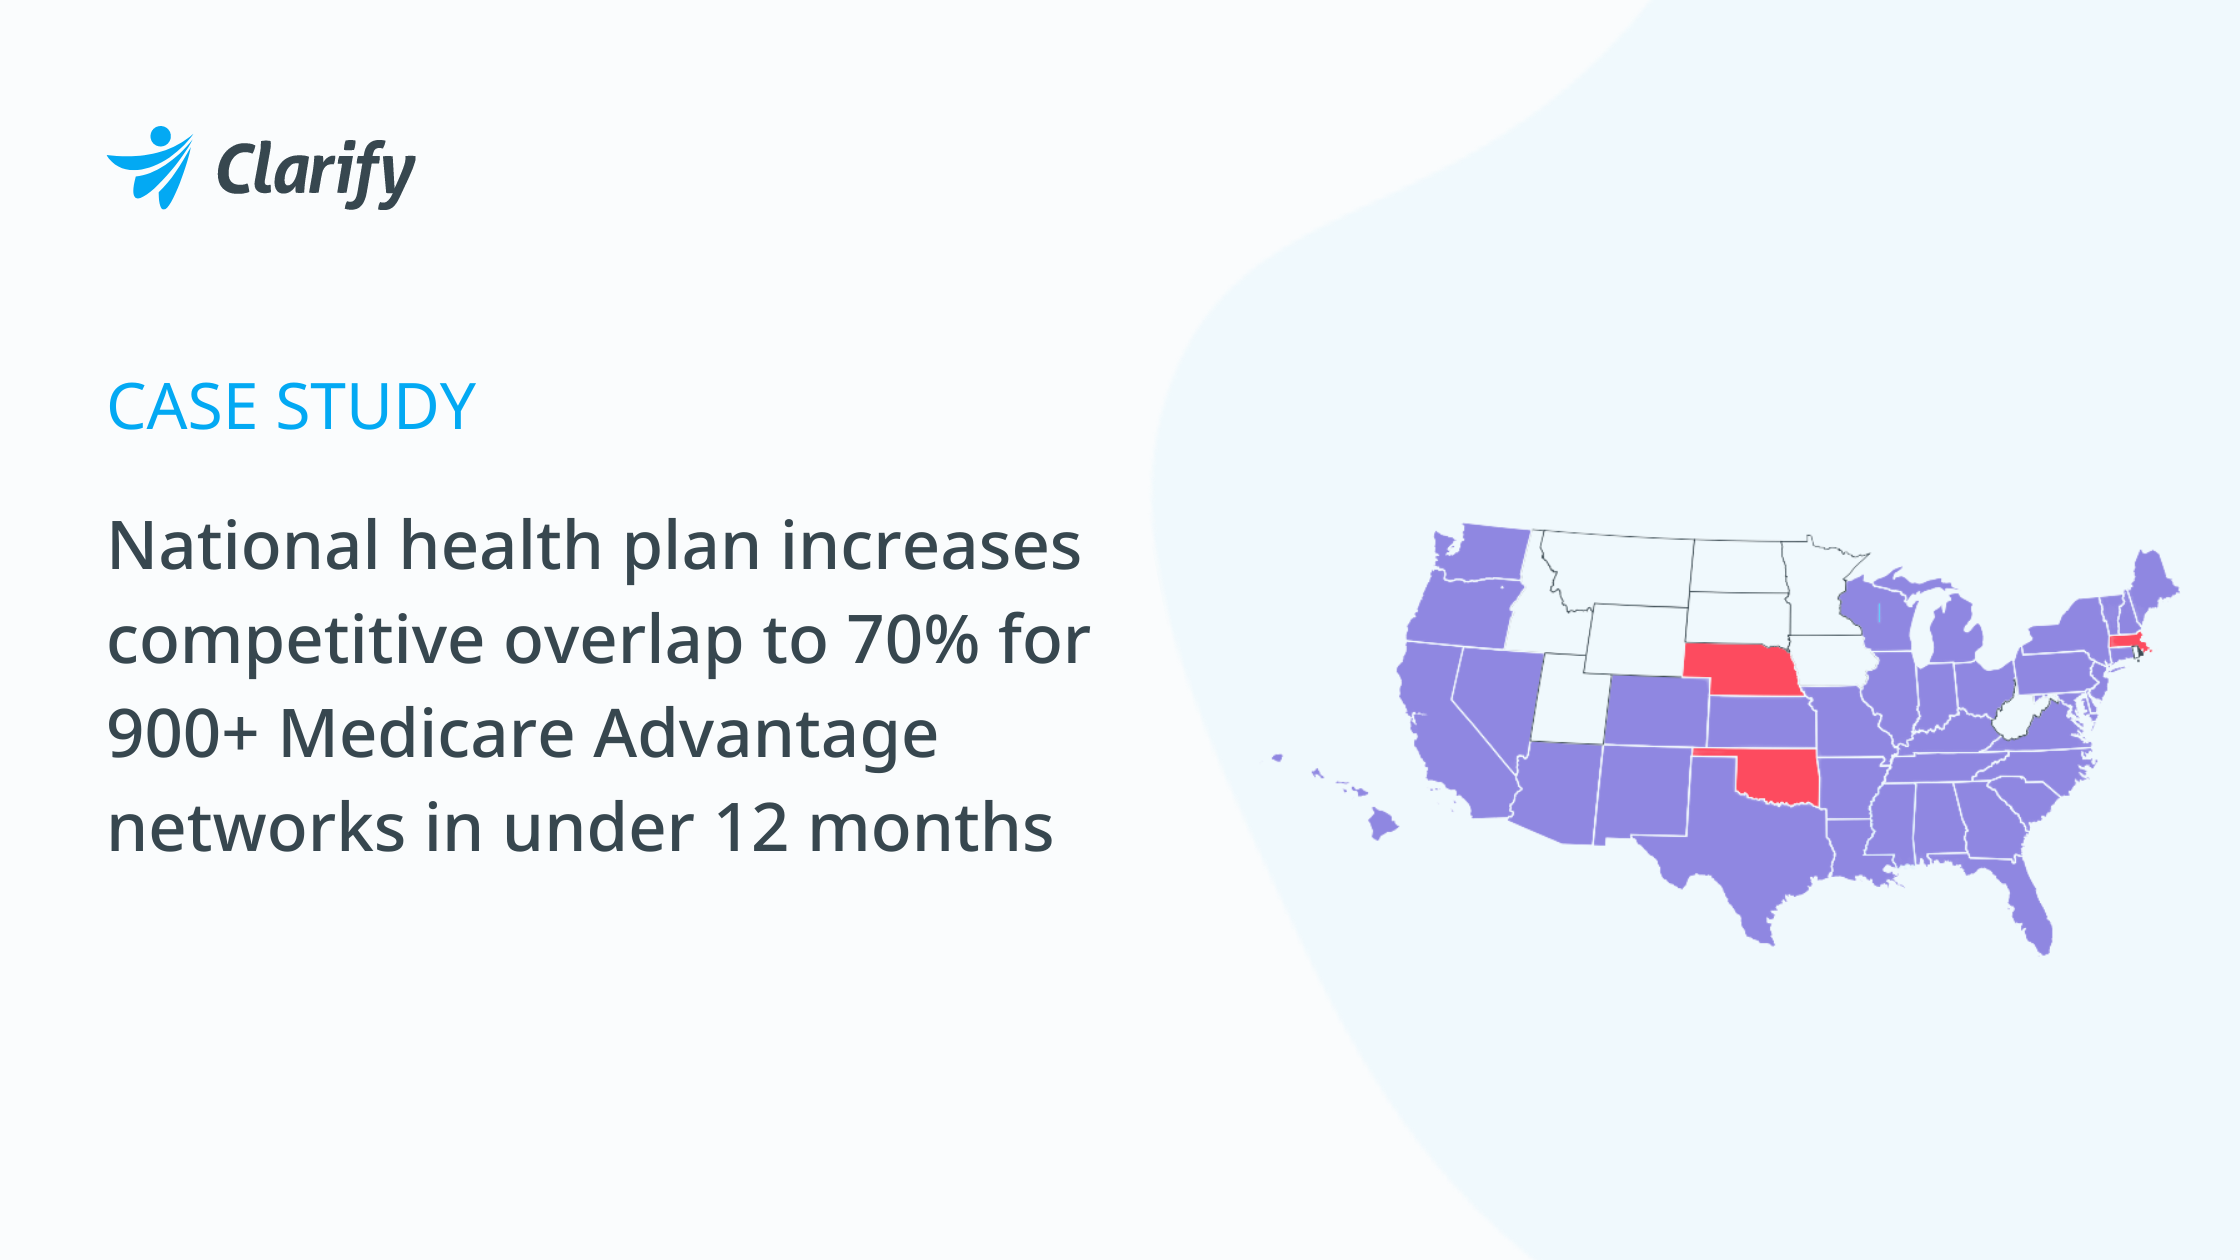 National health plan increases competitive overlap to 70% for 900+ Medicare Advantage networks in under 12 months